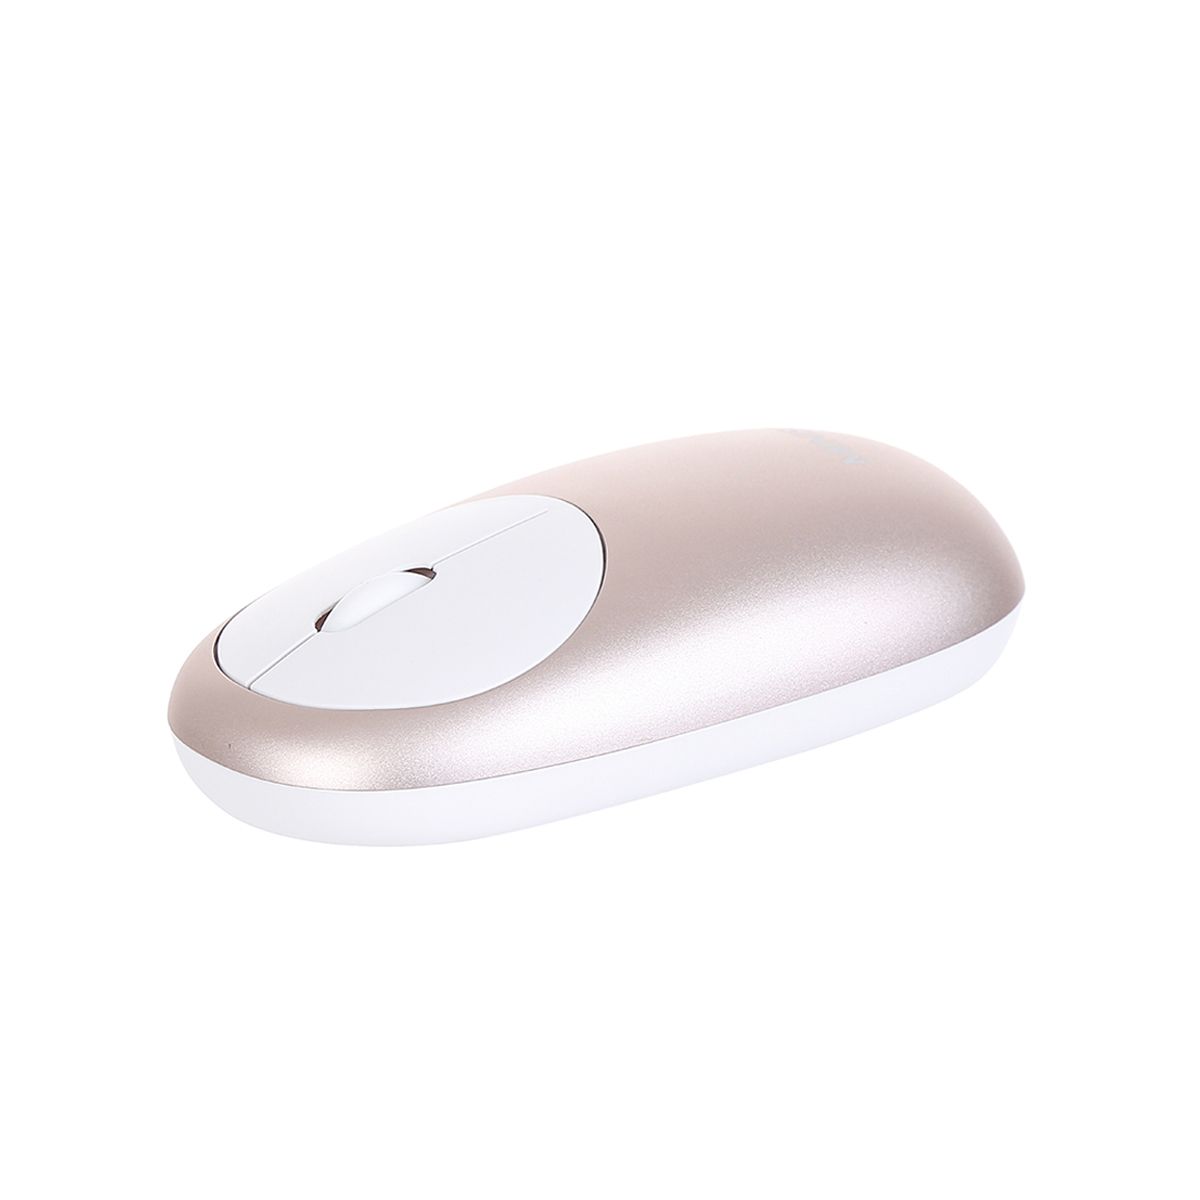 MINISO-WM-106-Rose-Gold-1200DPI--Ultrathin-Wireless-Metal-Mouse-for-PC-Oiffice-Laptop-1600671